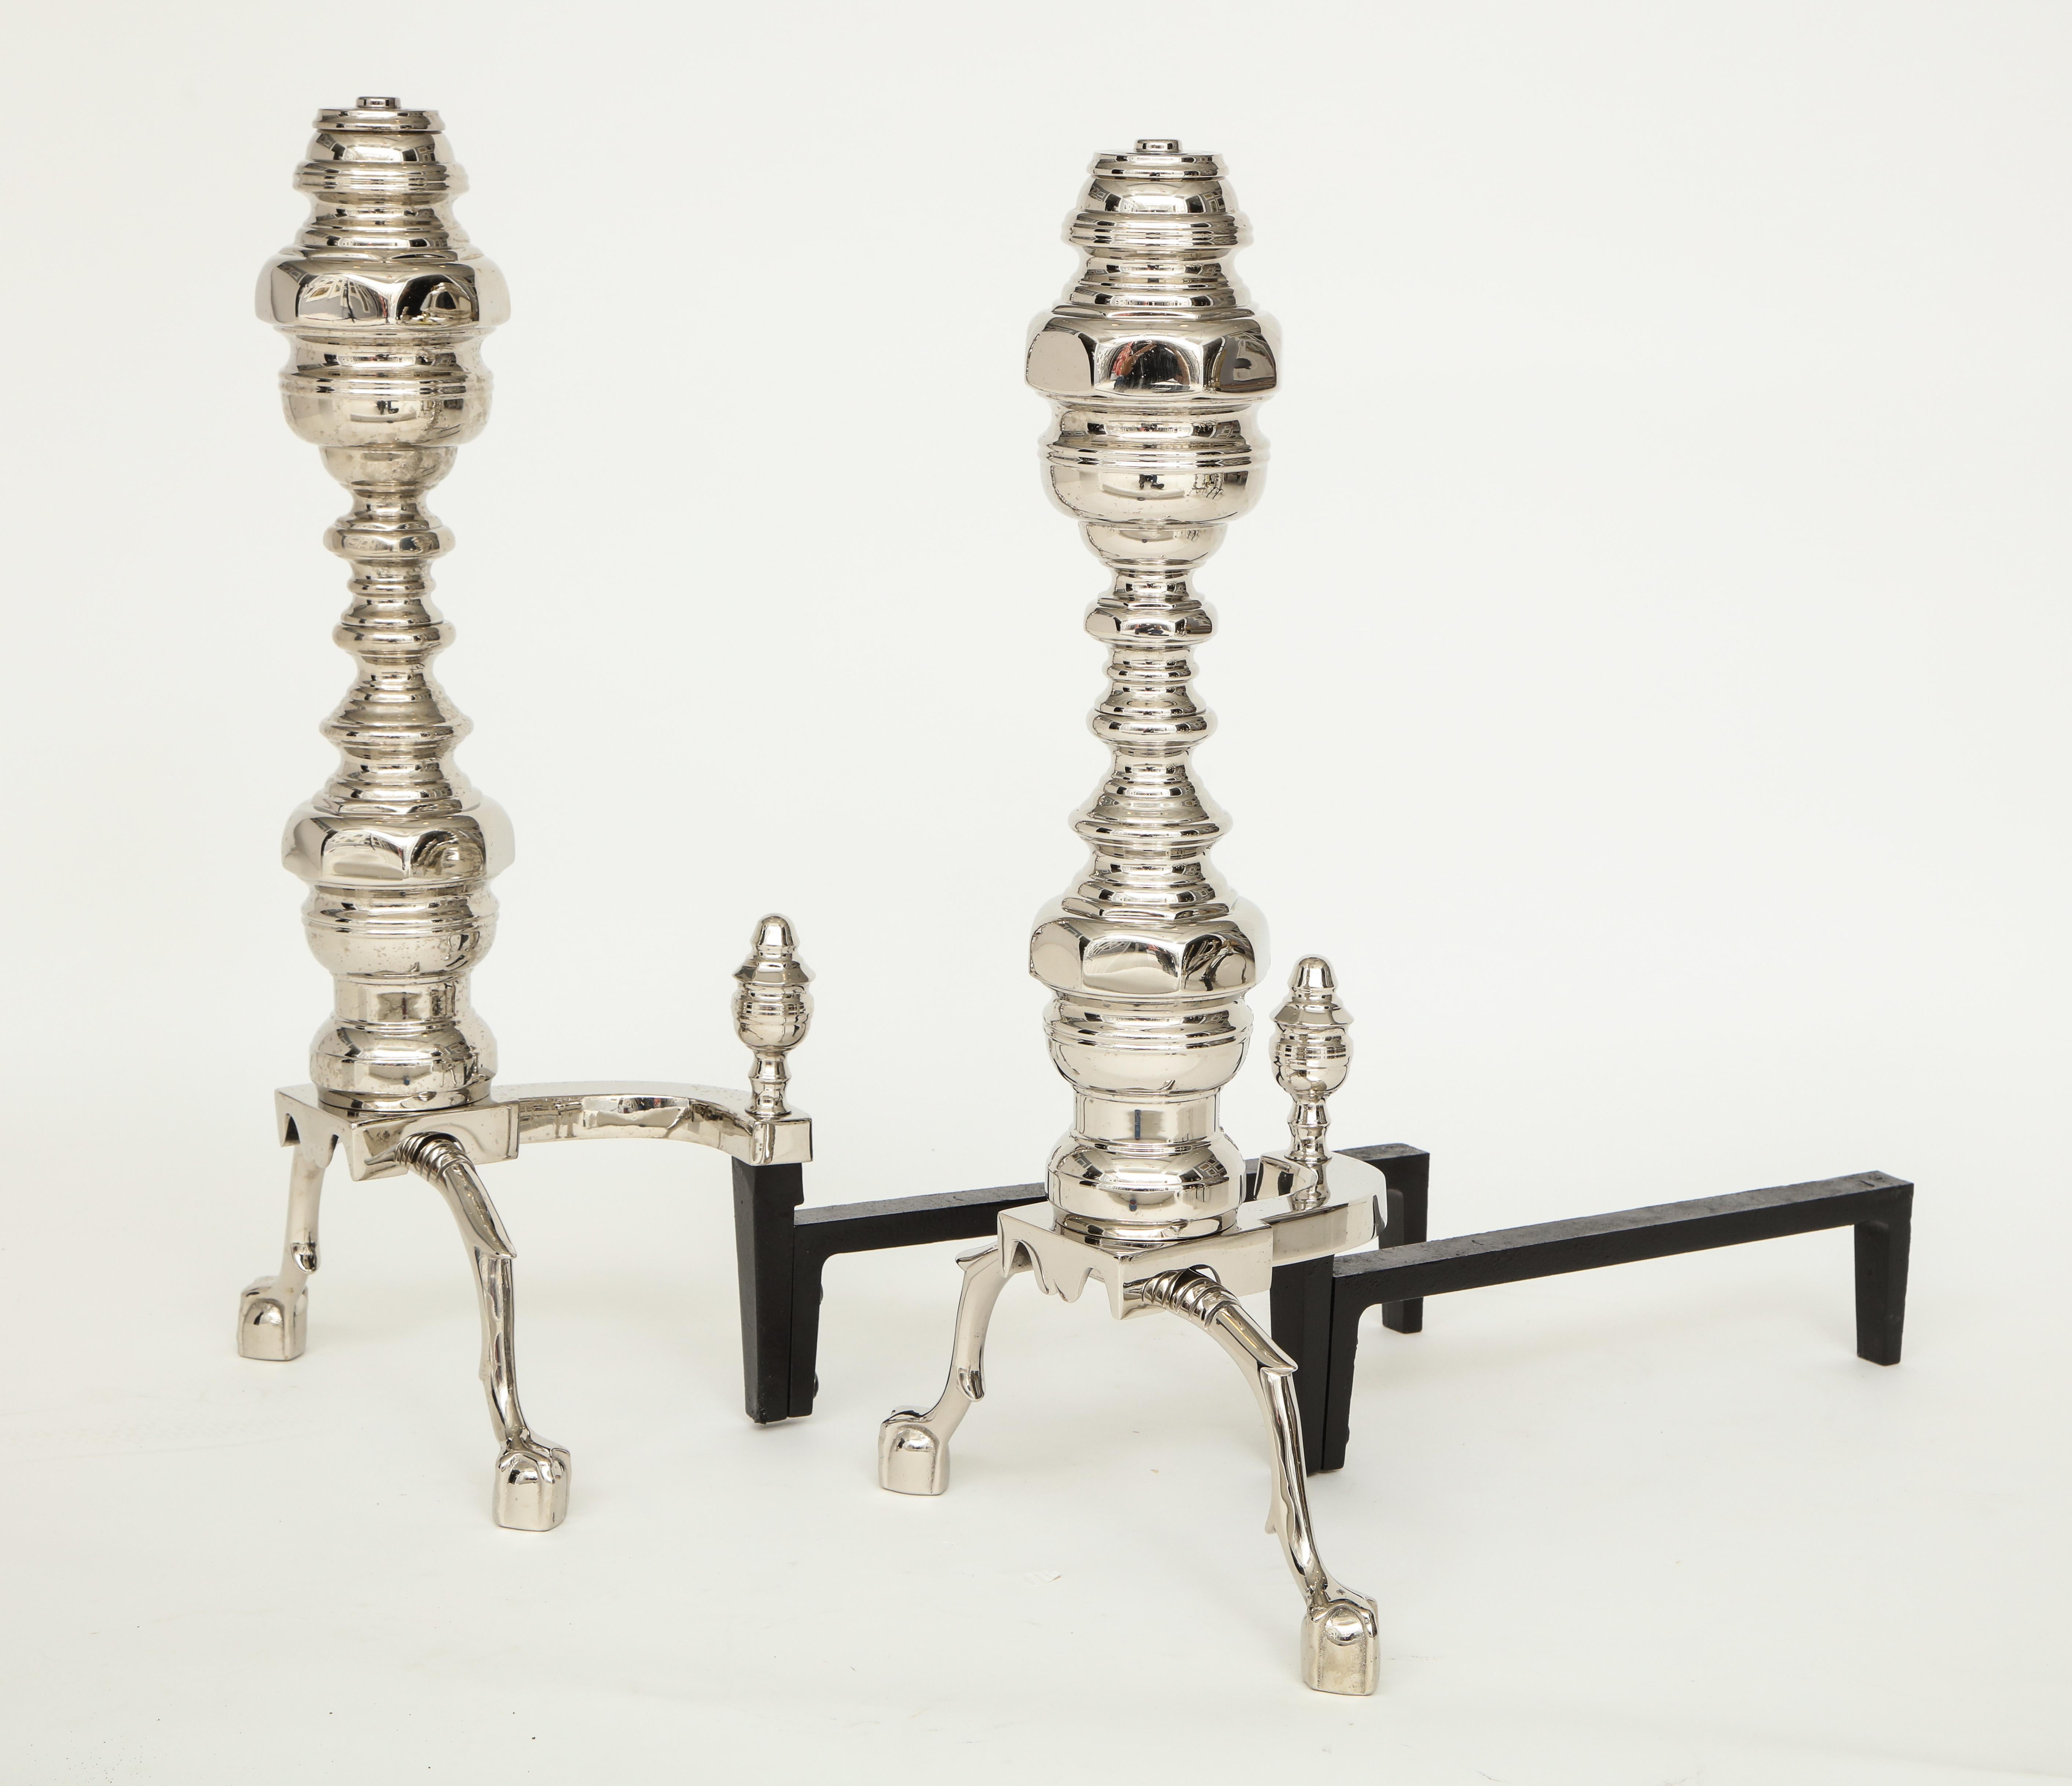 Pair of heavy engine turned andirons with traditional claw and ball feet, heavy iron backs. Great accent pieces for traditional to modern homes.